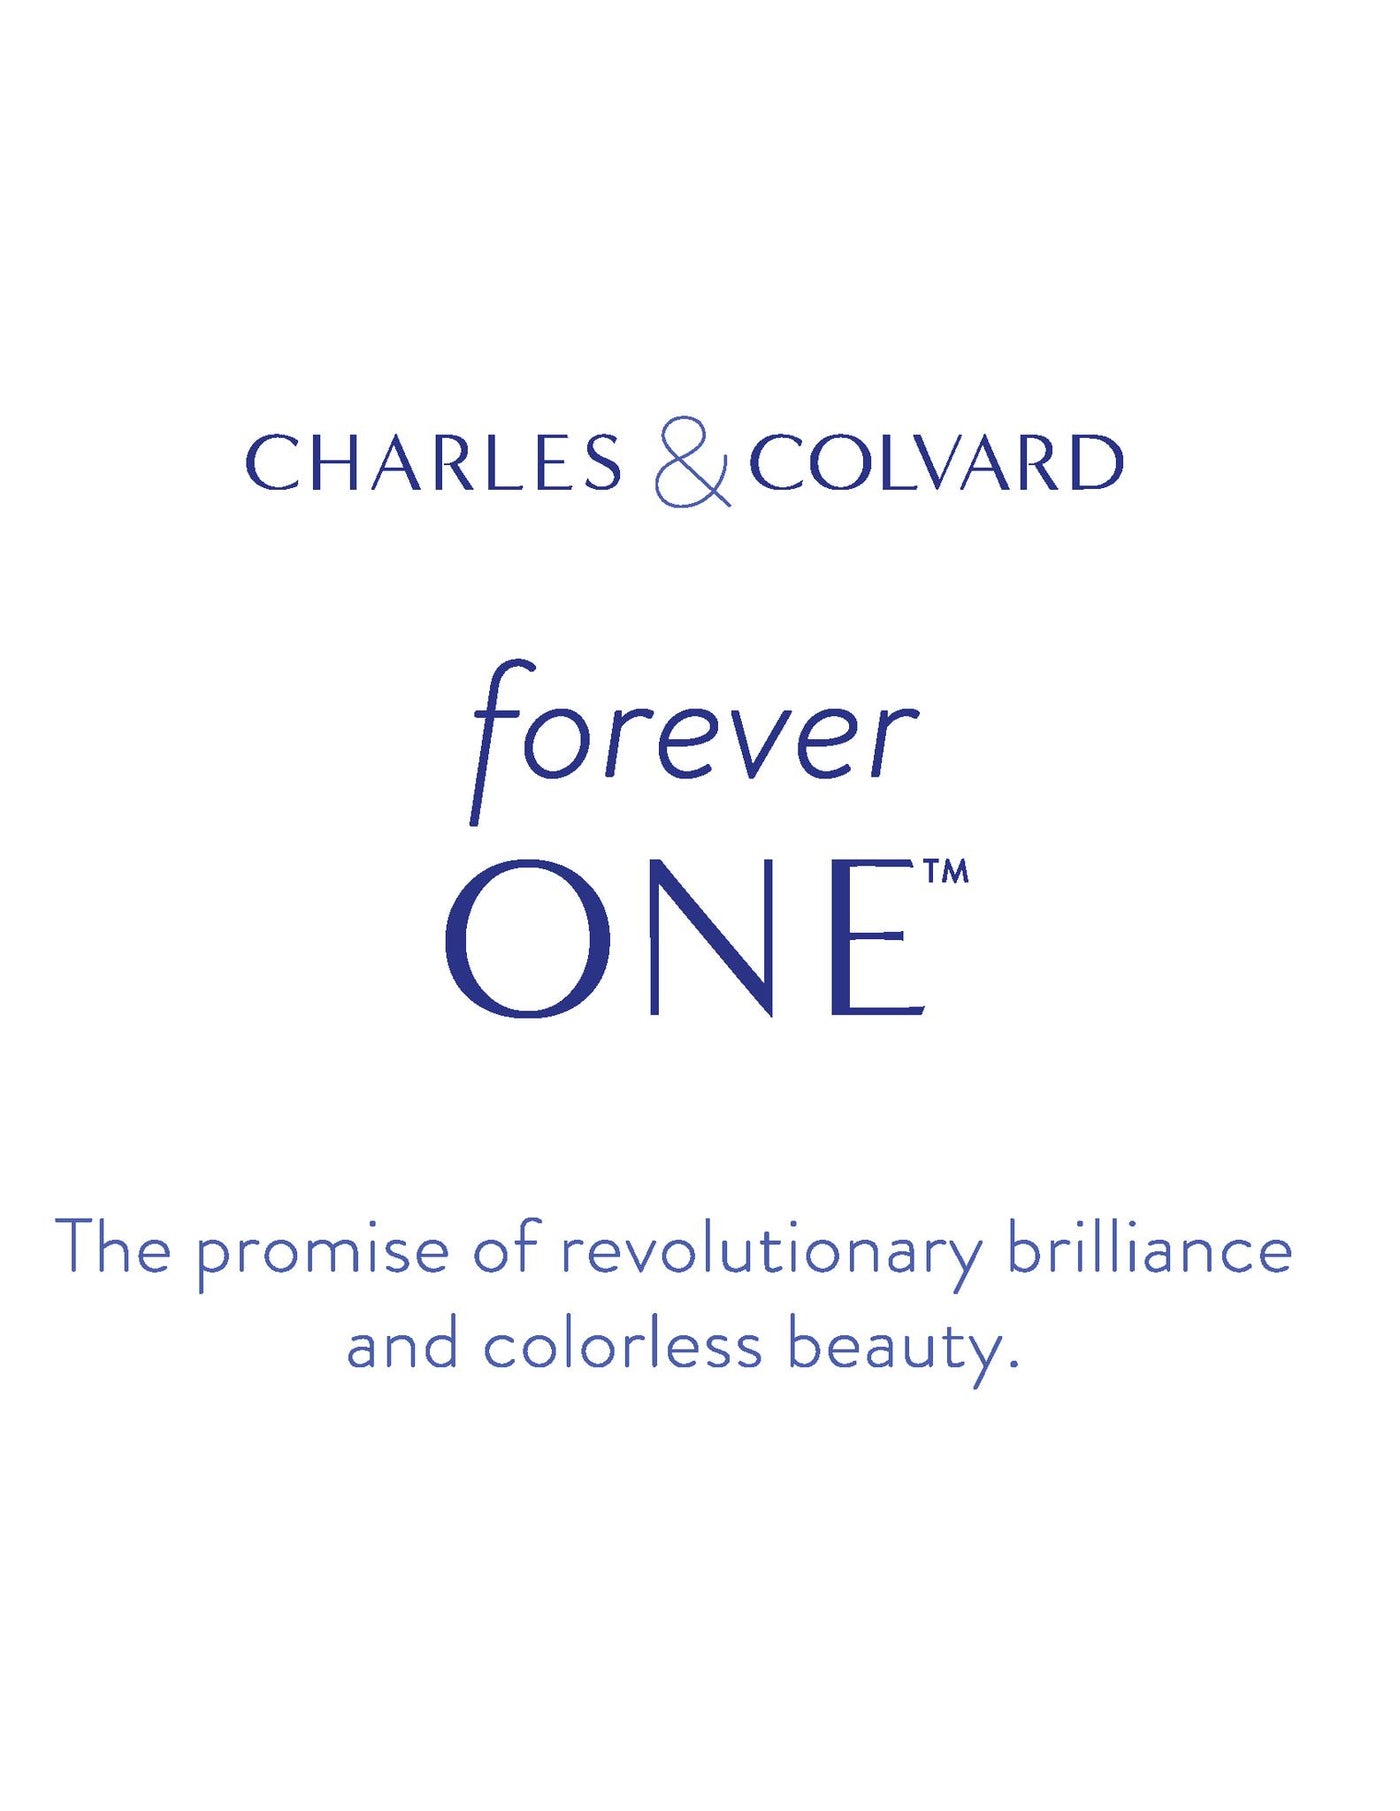 Certified Round Forever One Charles & Colvard Loose Moissanite Stone - 3.00 Carats - E Color - VVS1 Clarity-Certified Forever ONE Moissanite-Fire & Brilliance ®